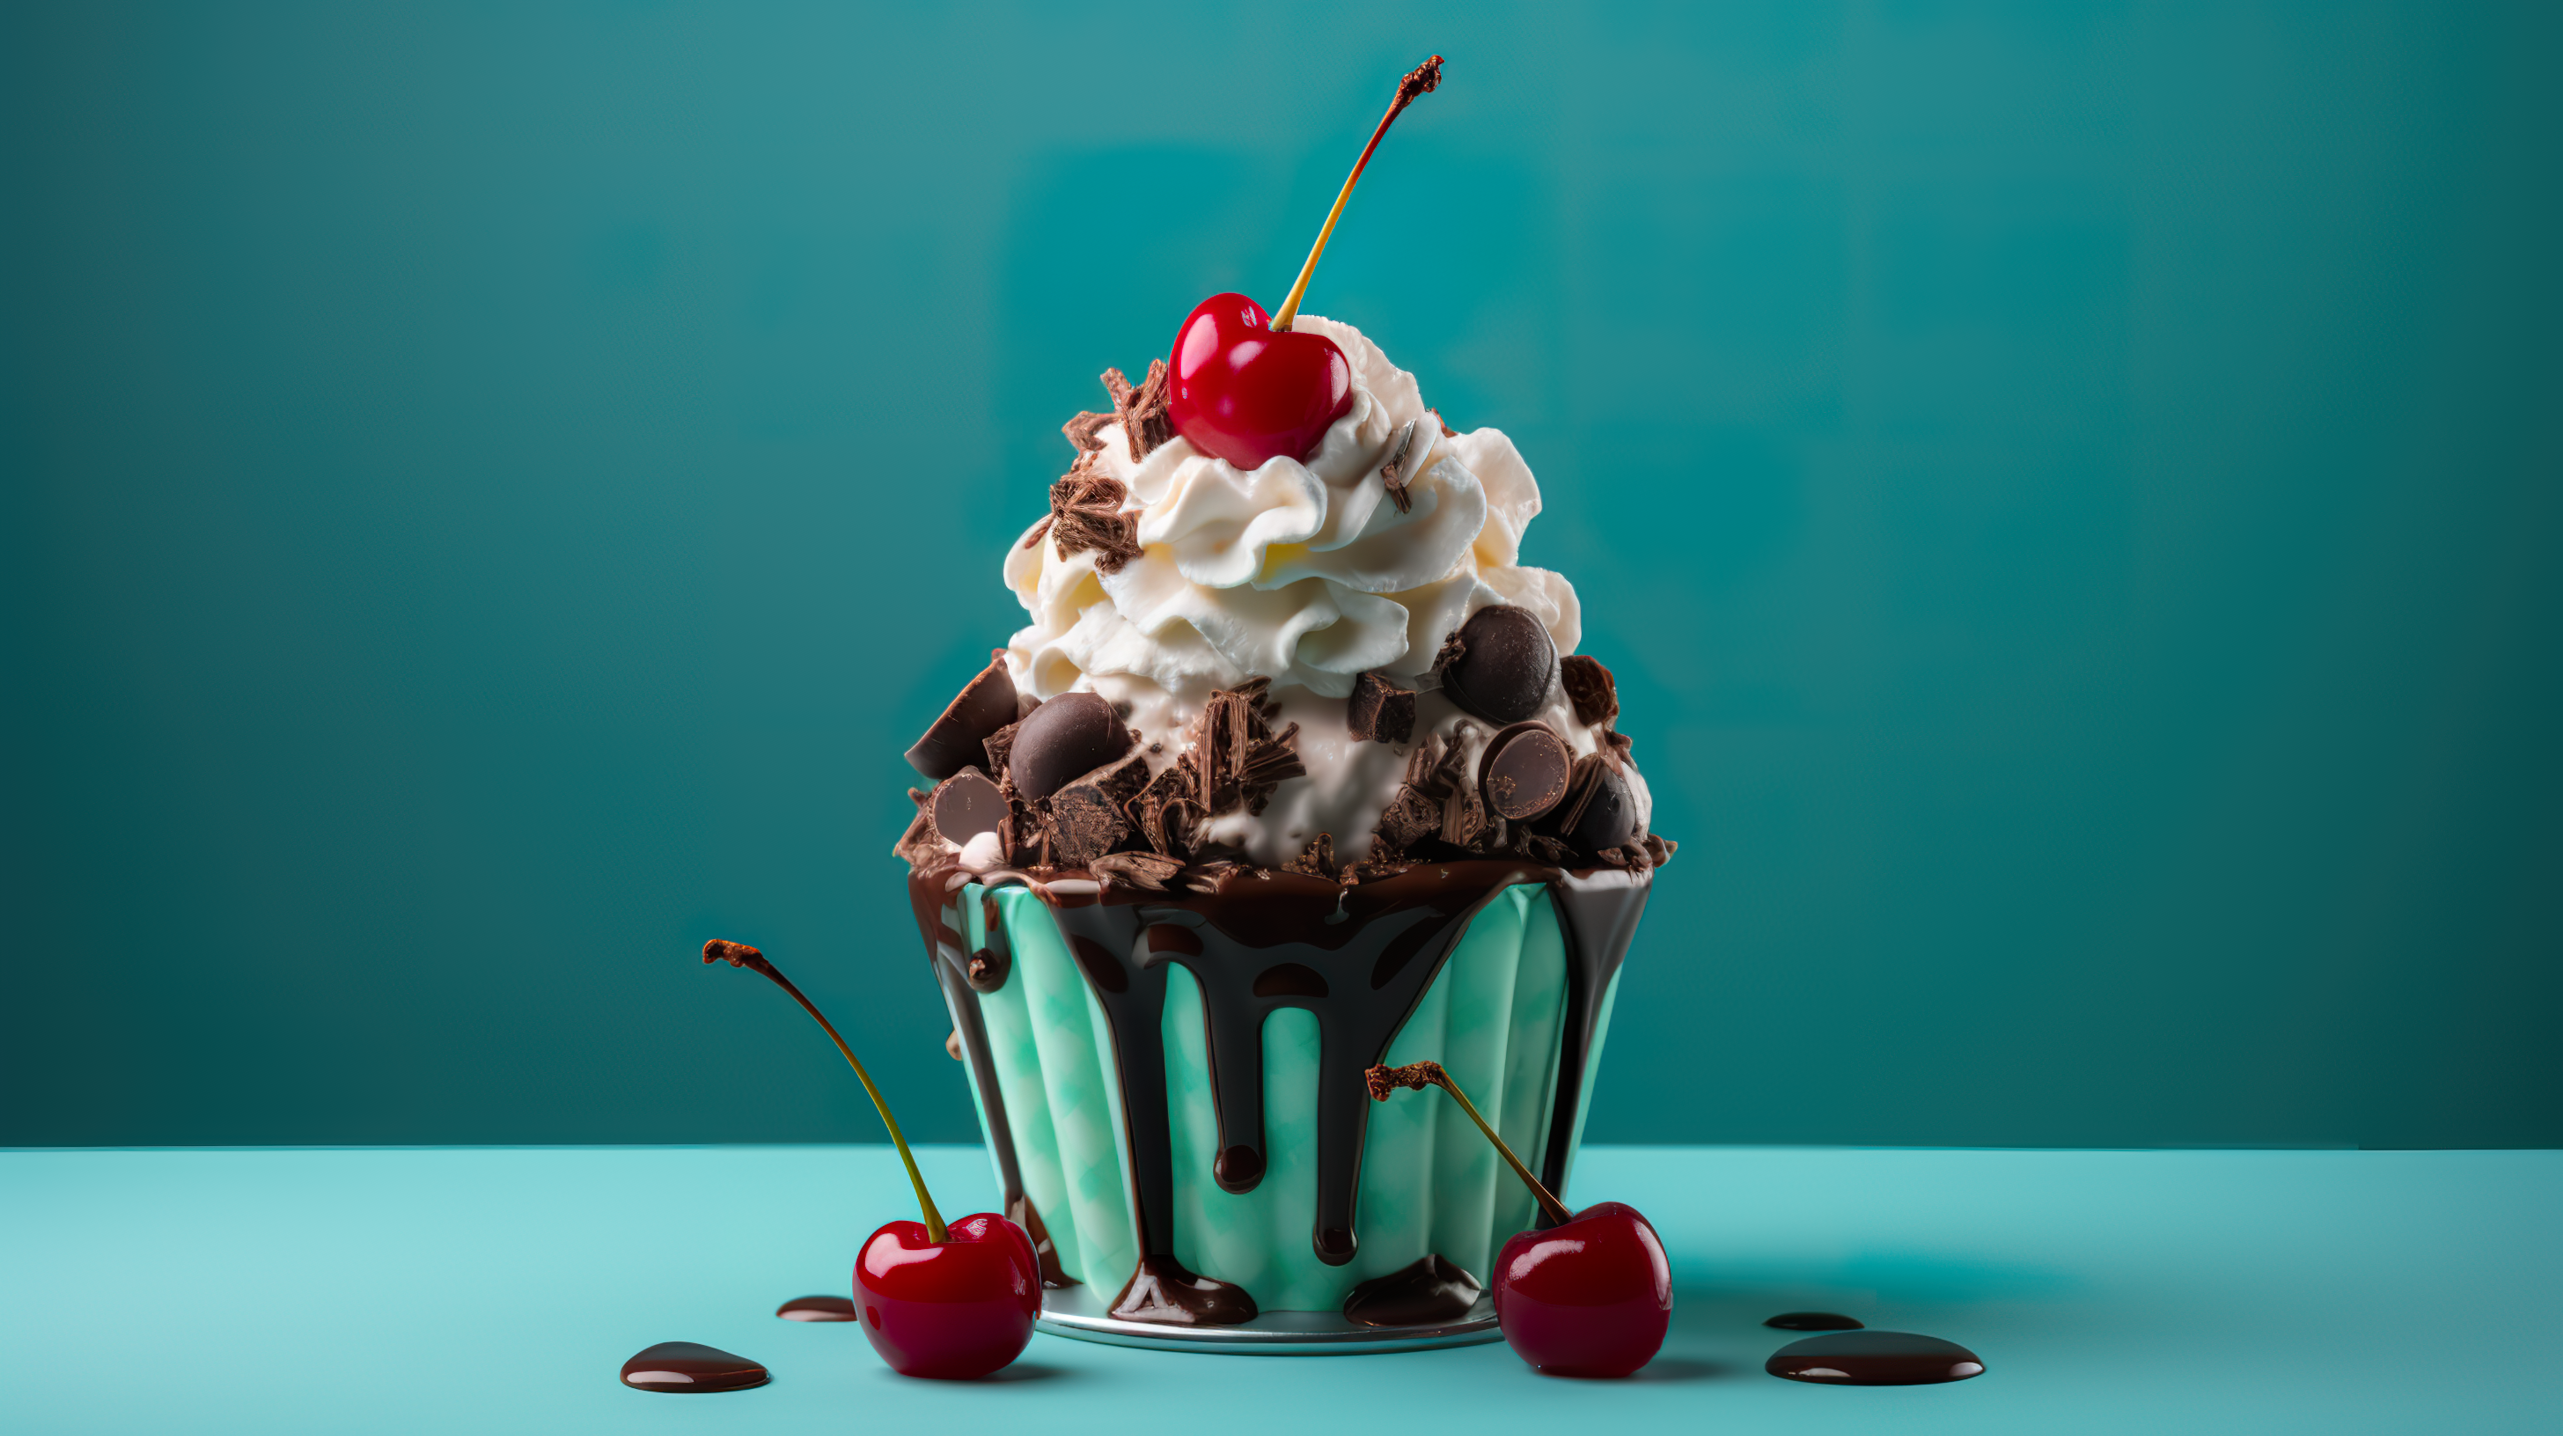 Decadent chocolate sundae topped with whipped cream and cherries, perfect for a HD ice cream themed desktop wallpaper.